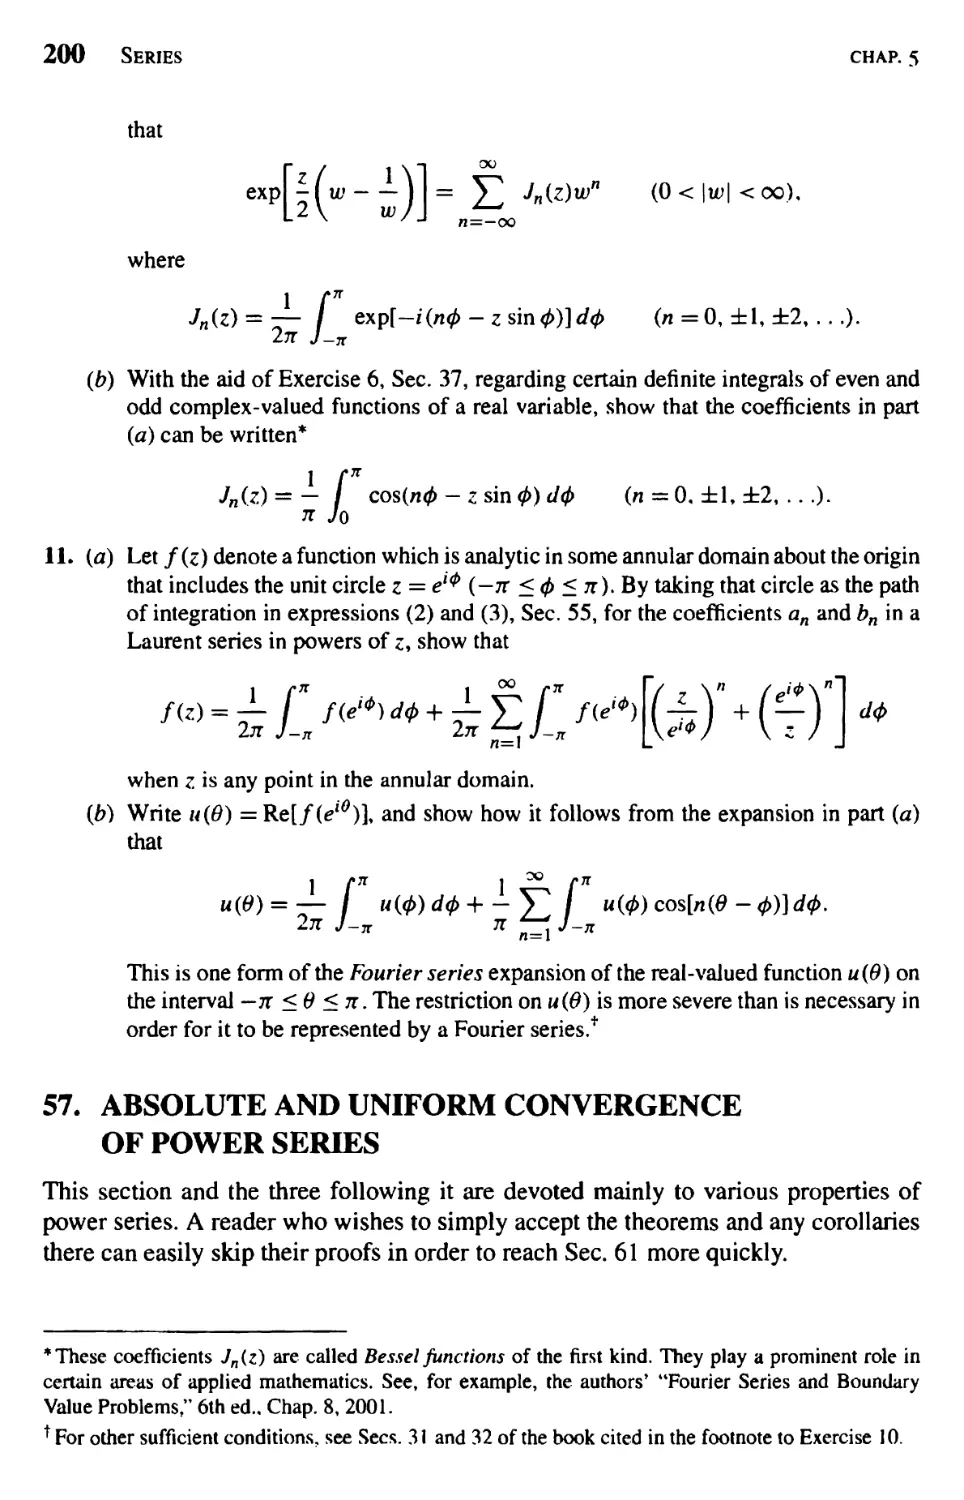 Absolute and Uniform Convergence of Power Series